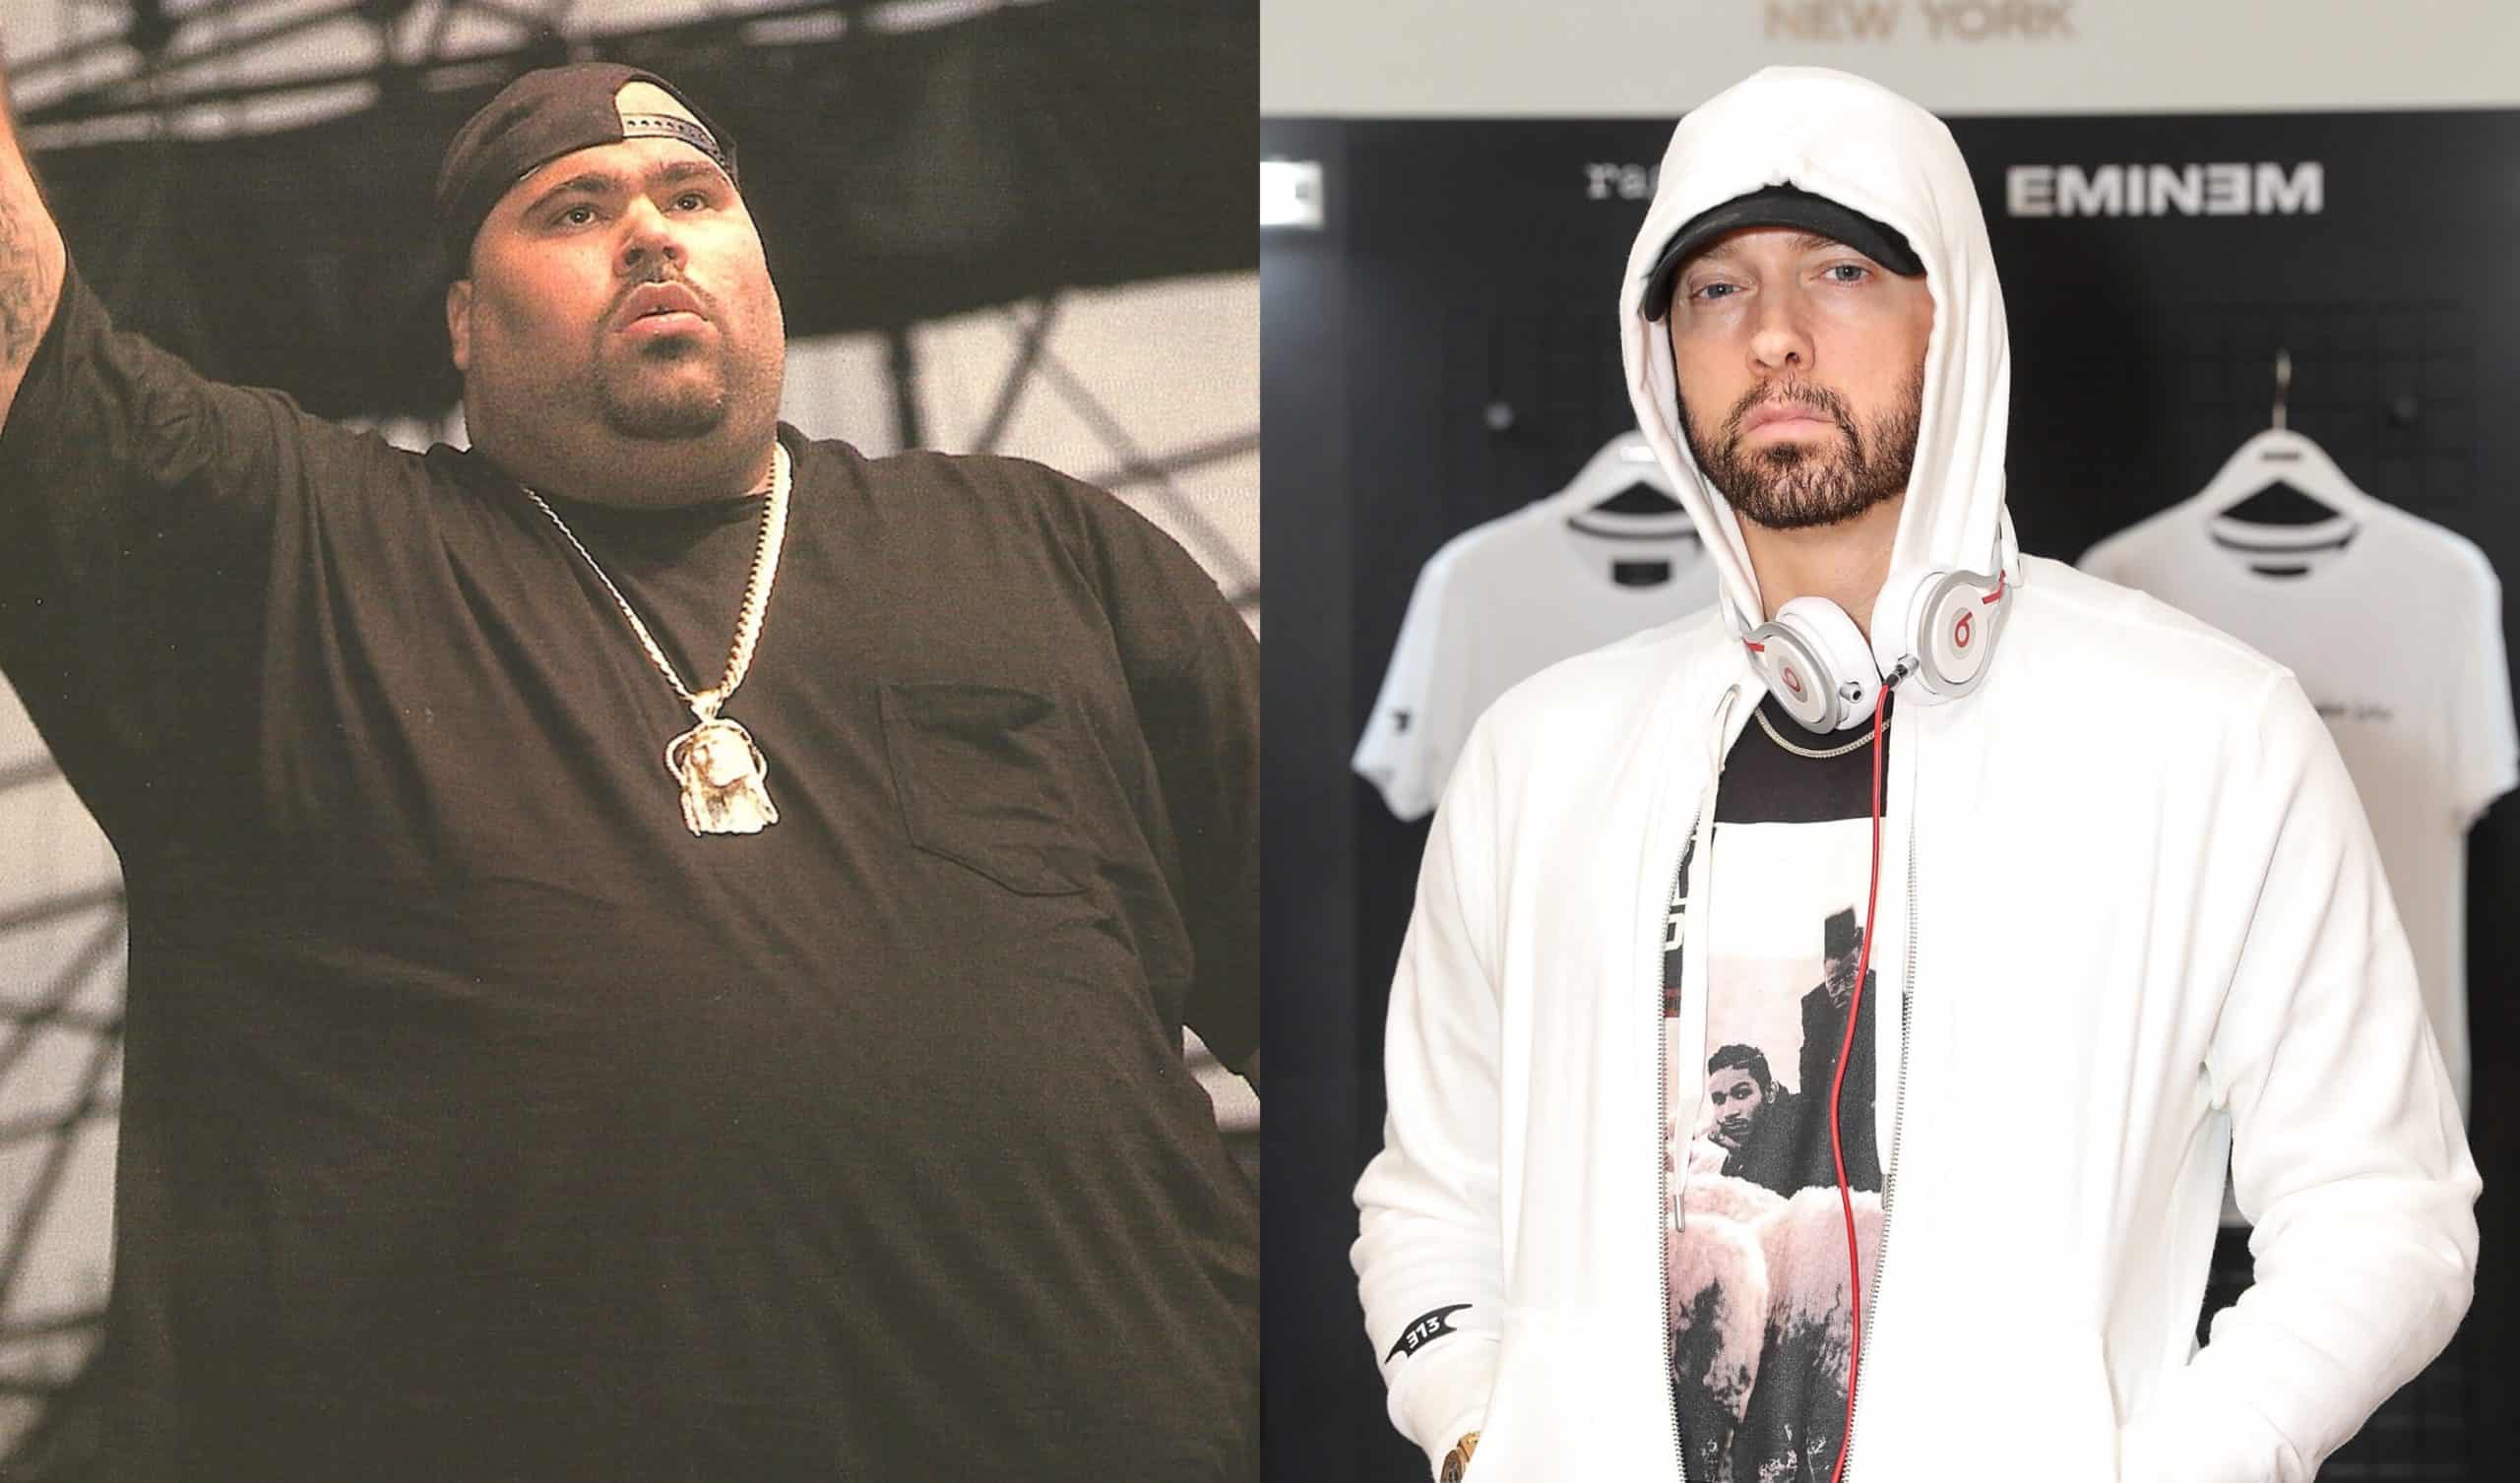 Remy Ma Says That Big Pun Wanted To Smash Eminem in a Collaboration